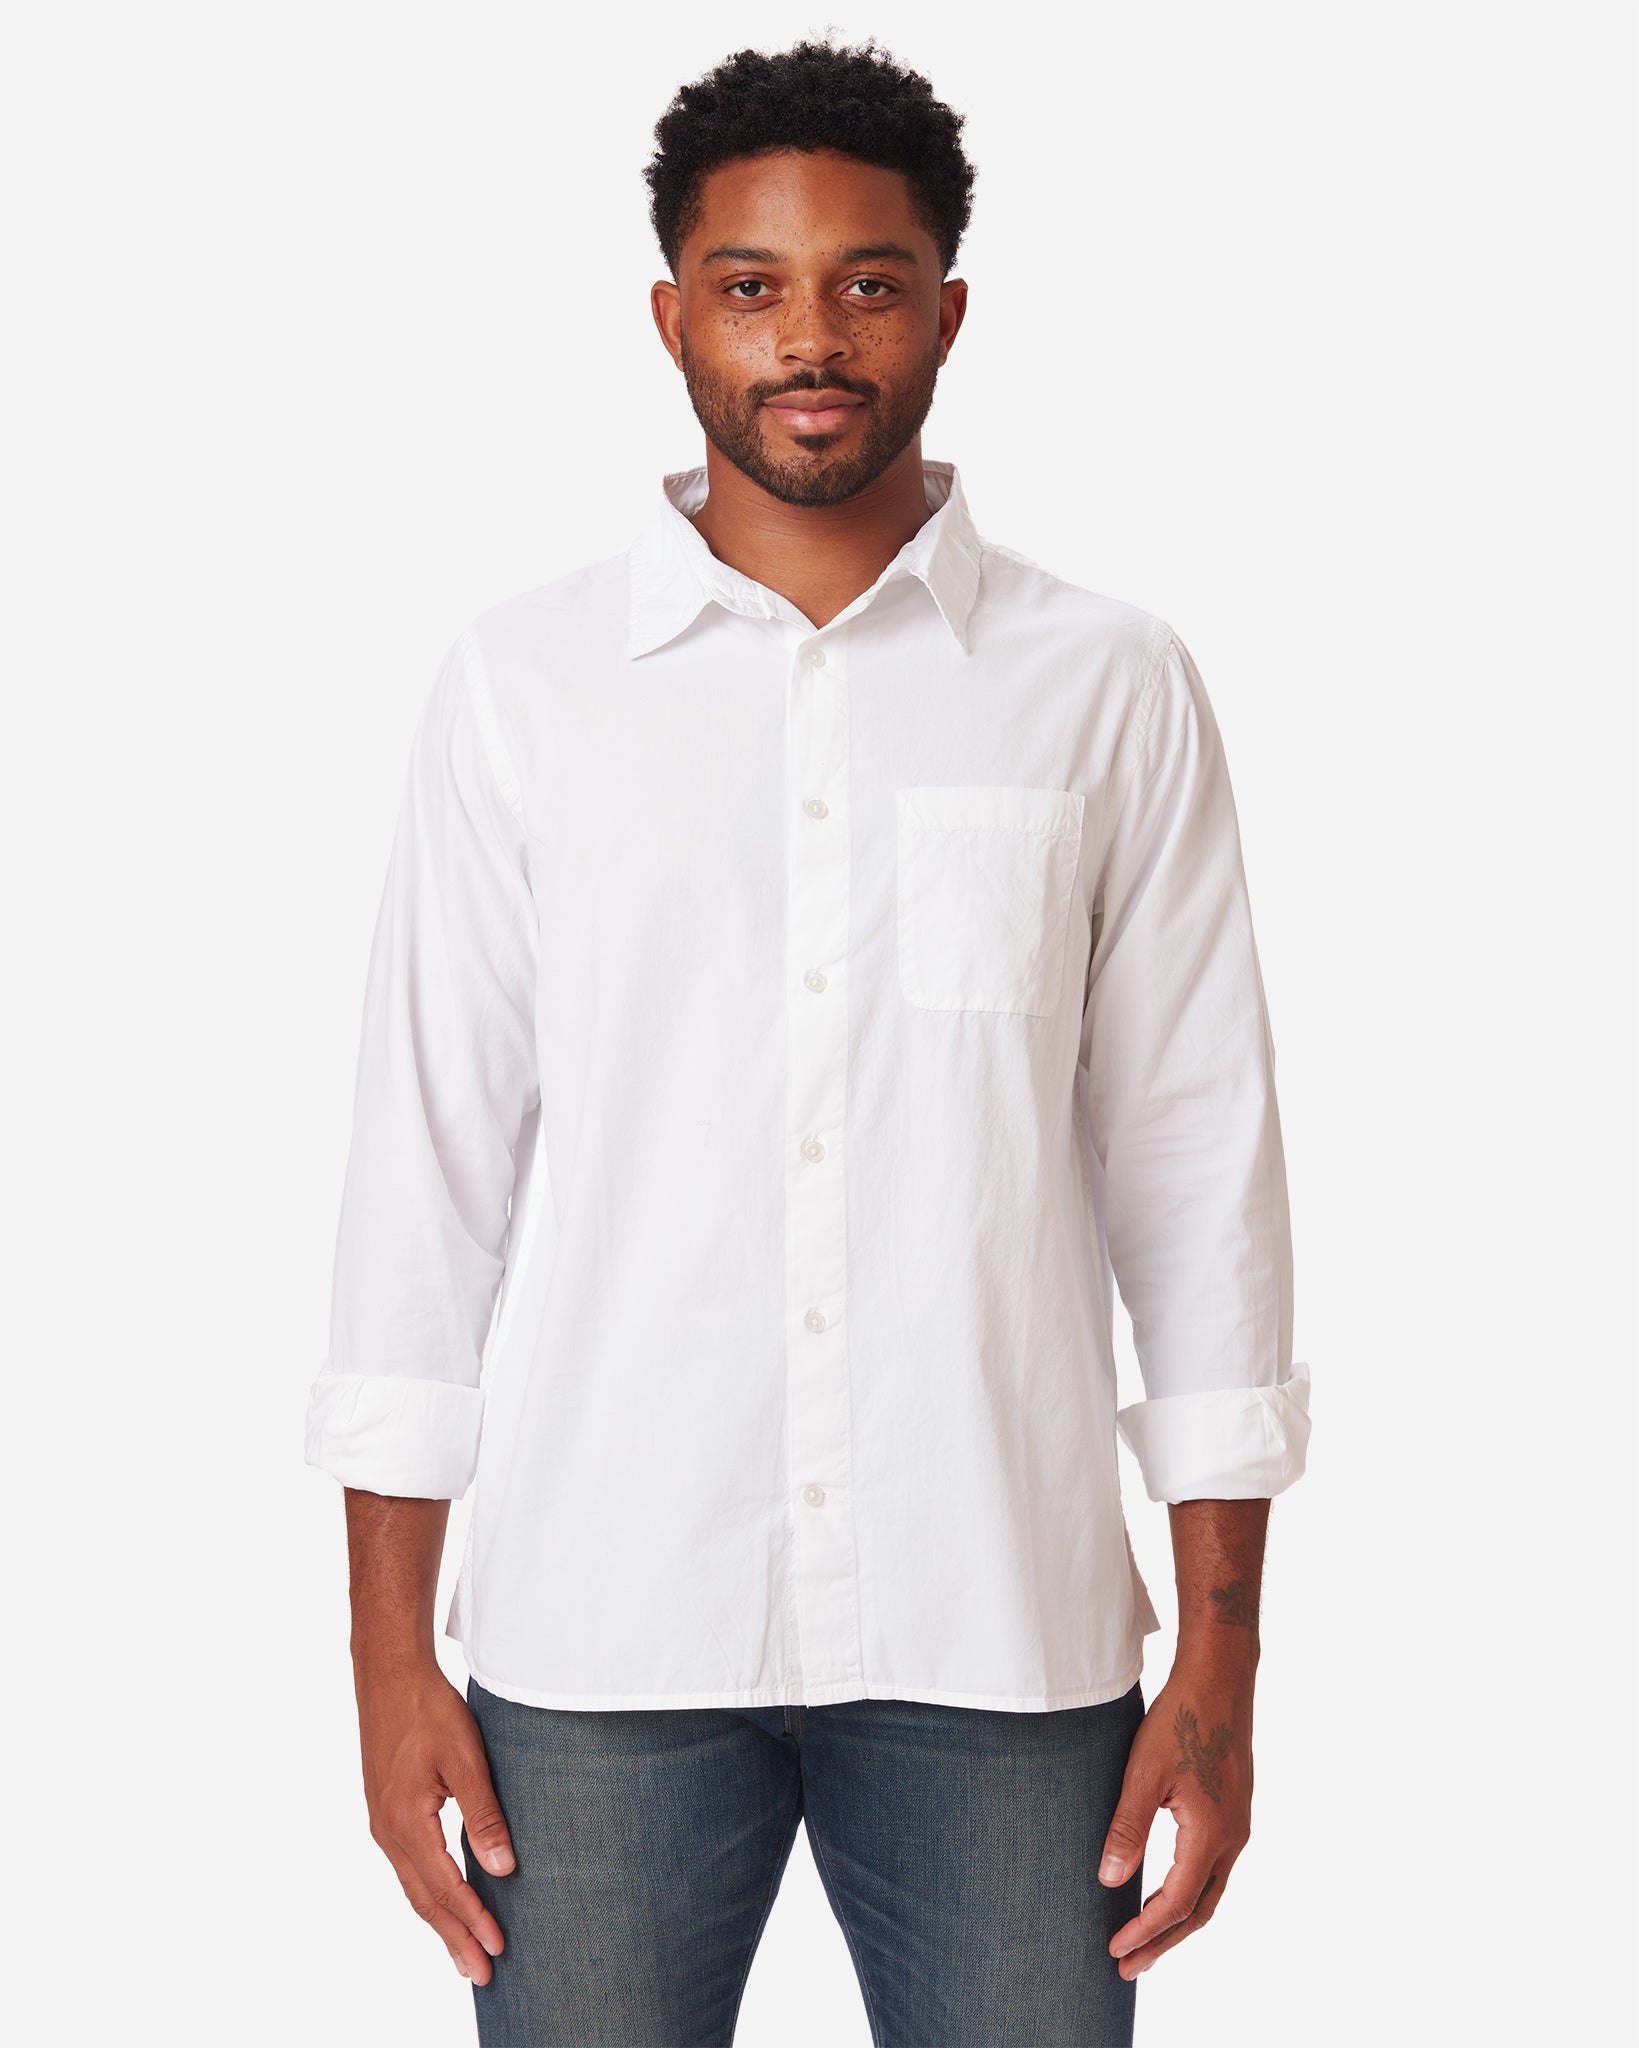 model facing directly forward wearing men's white long sleeve tailored poplin shirt with color matched buttons and a single pocket in standard height option